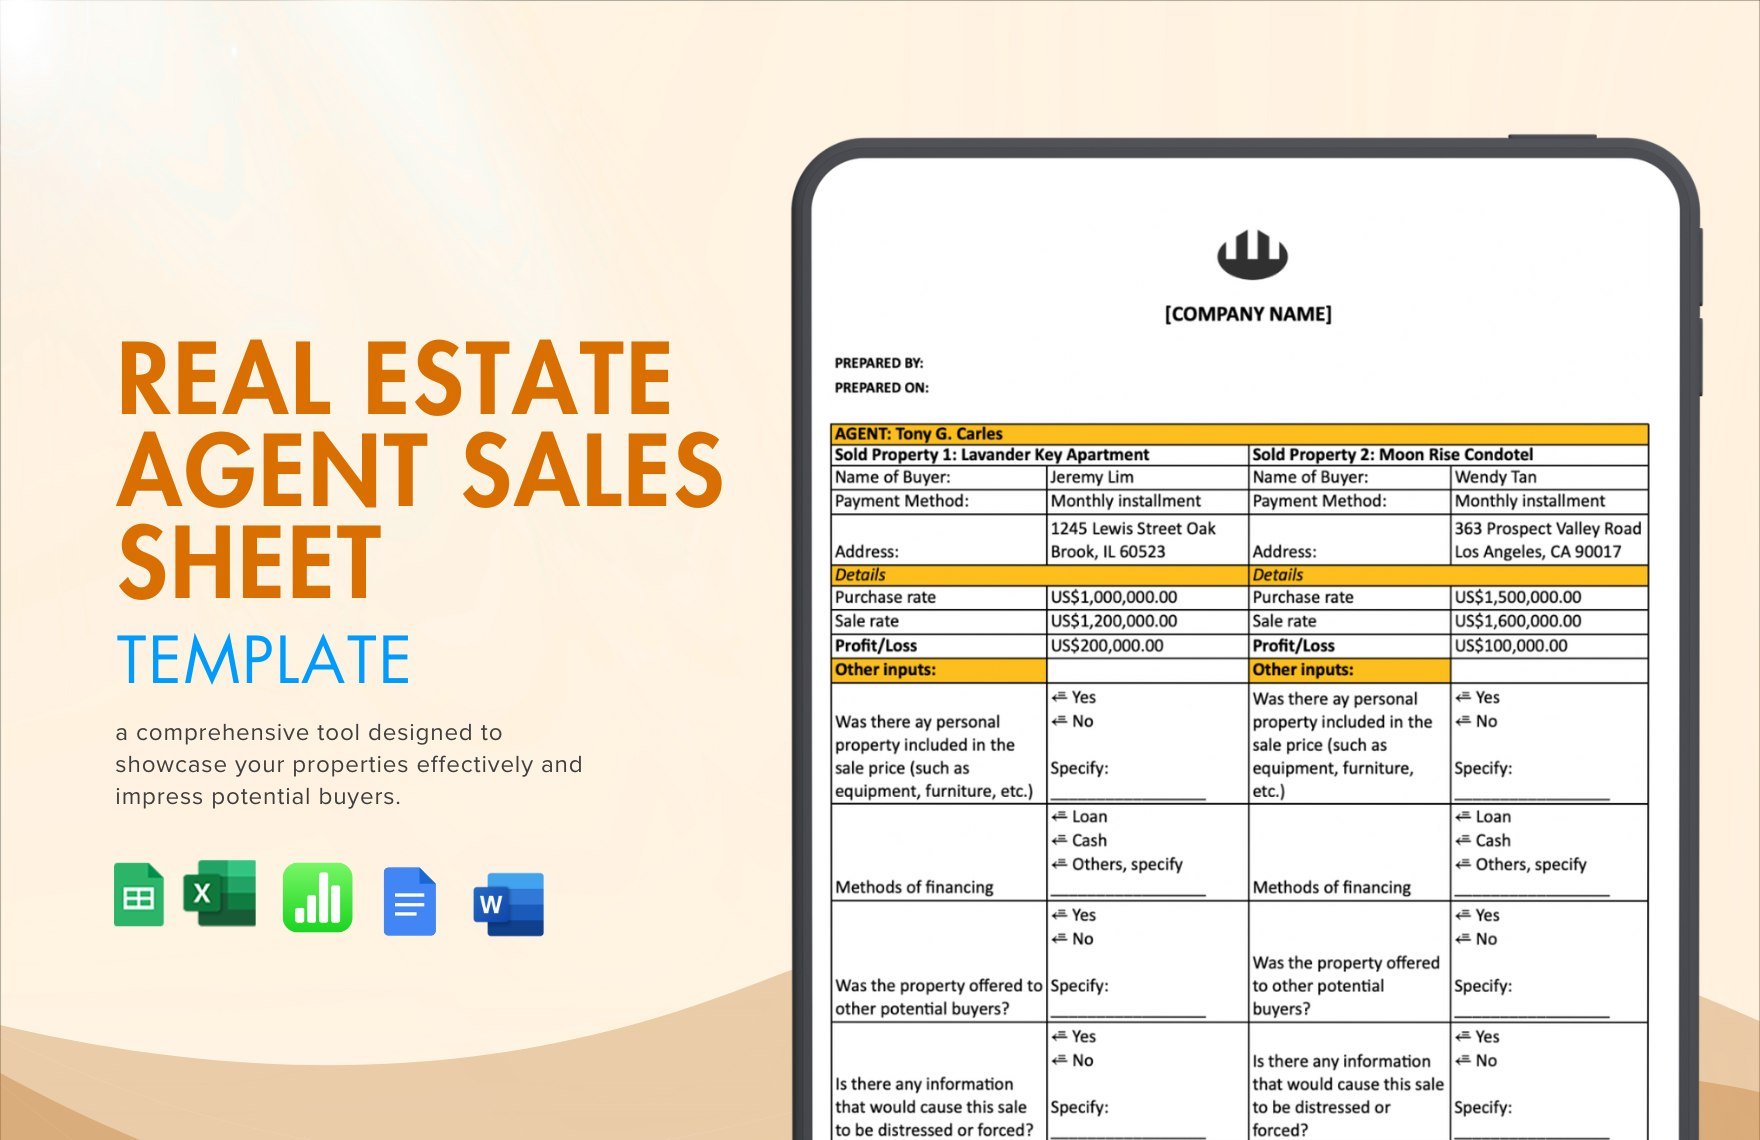 Real Estate Agent Sales Sheet Template